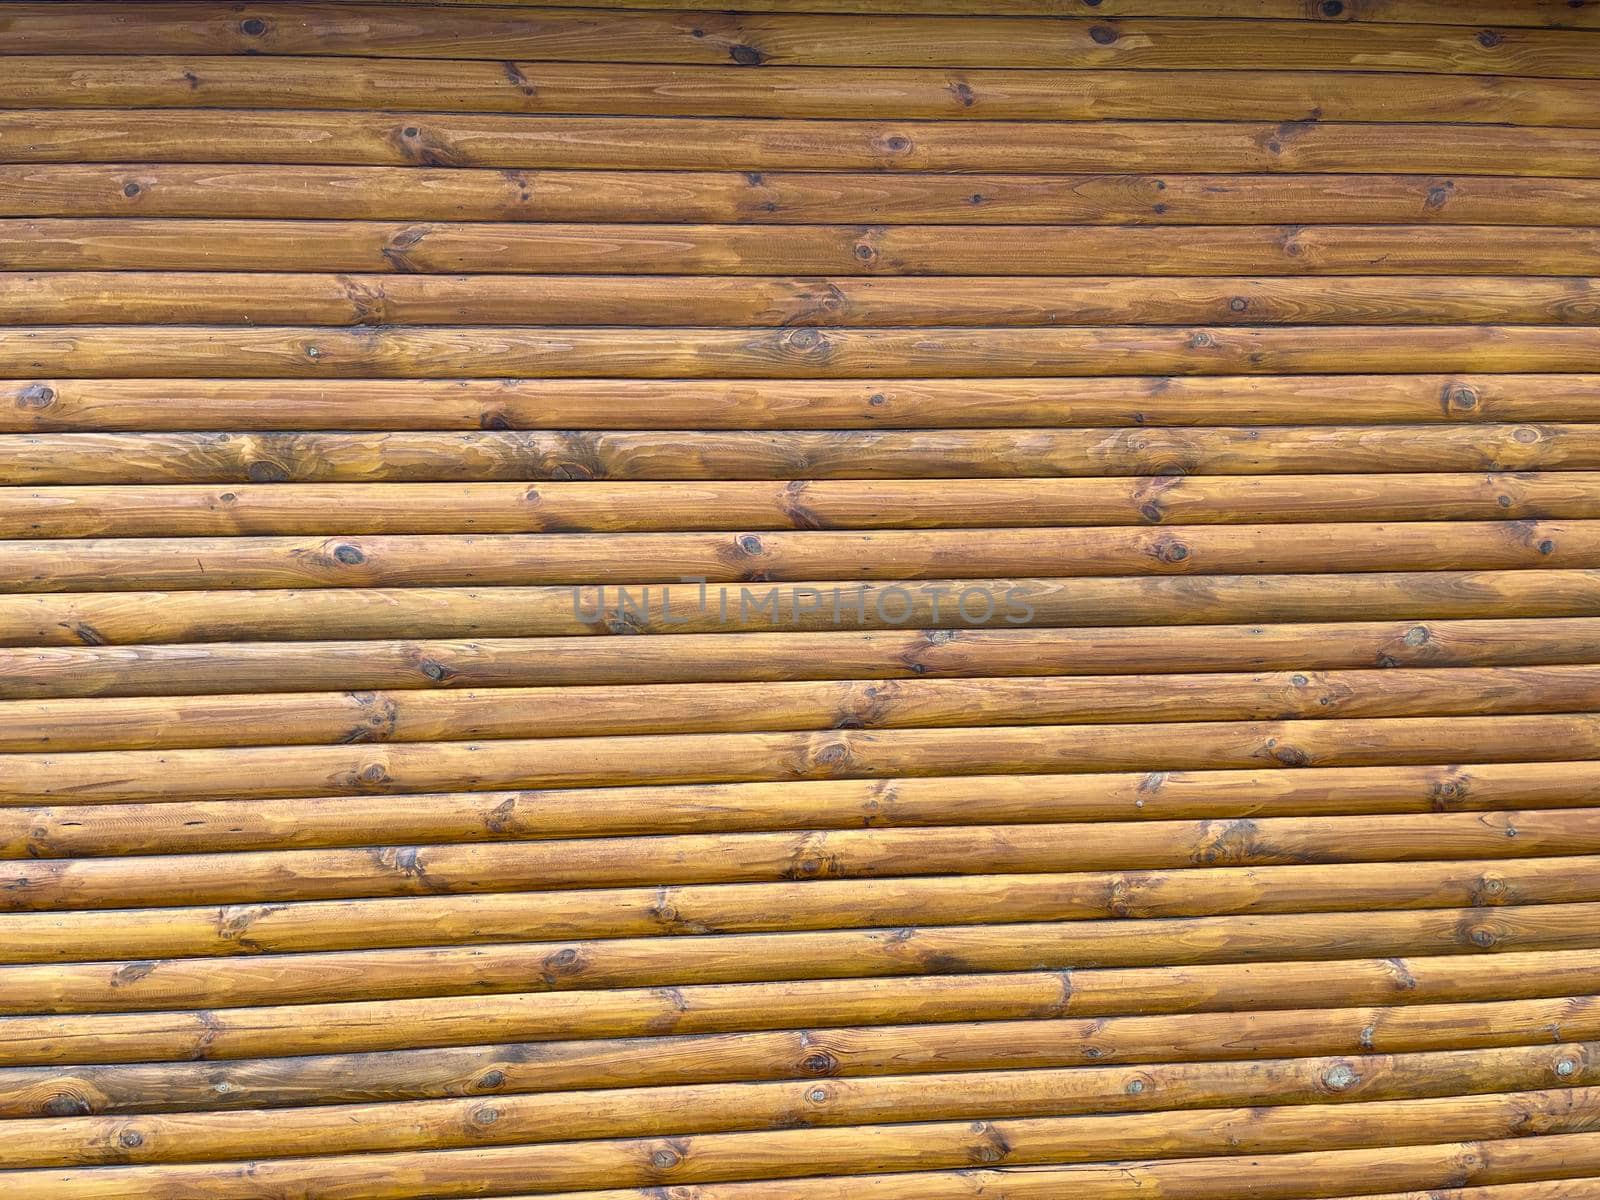 Texture of wooden planks. Close up of wooden boards. Concept of background for your text. by epidemiks